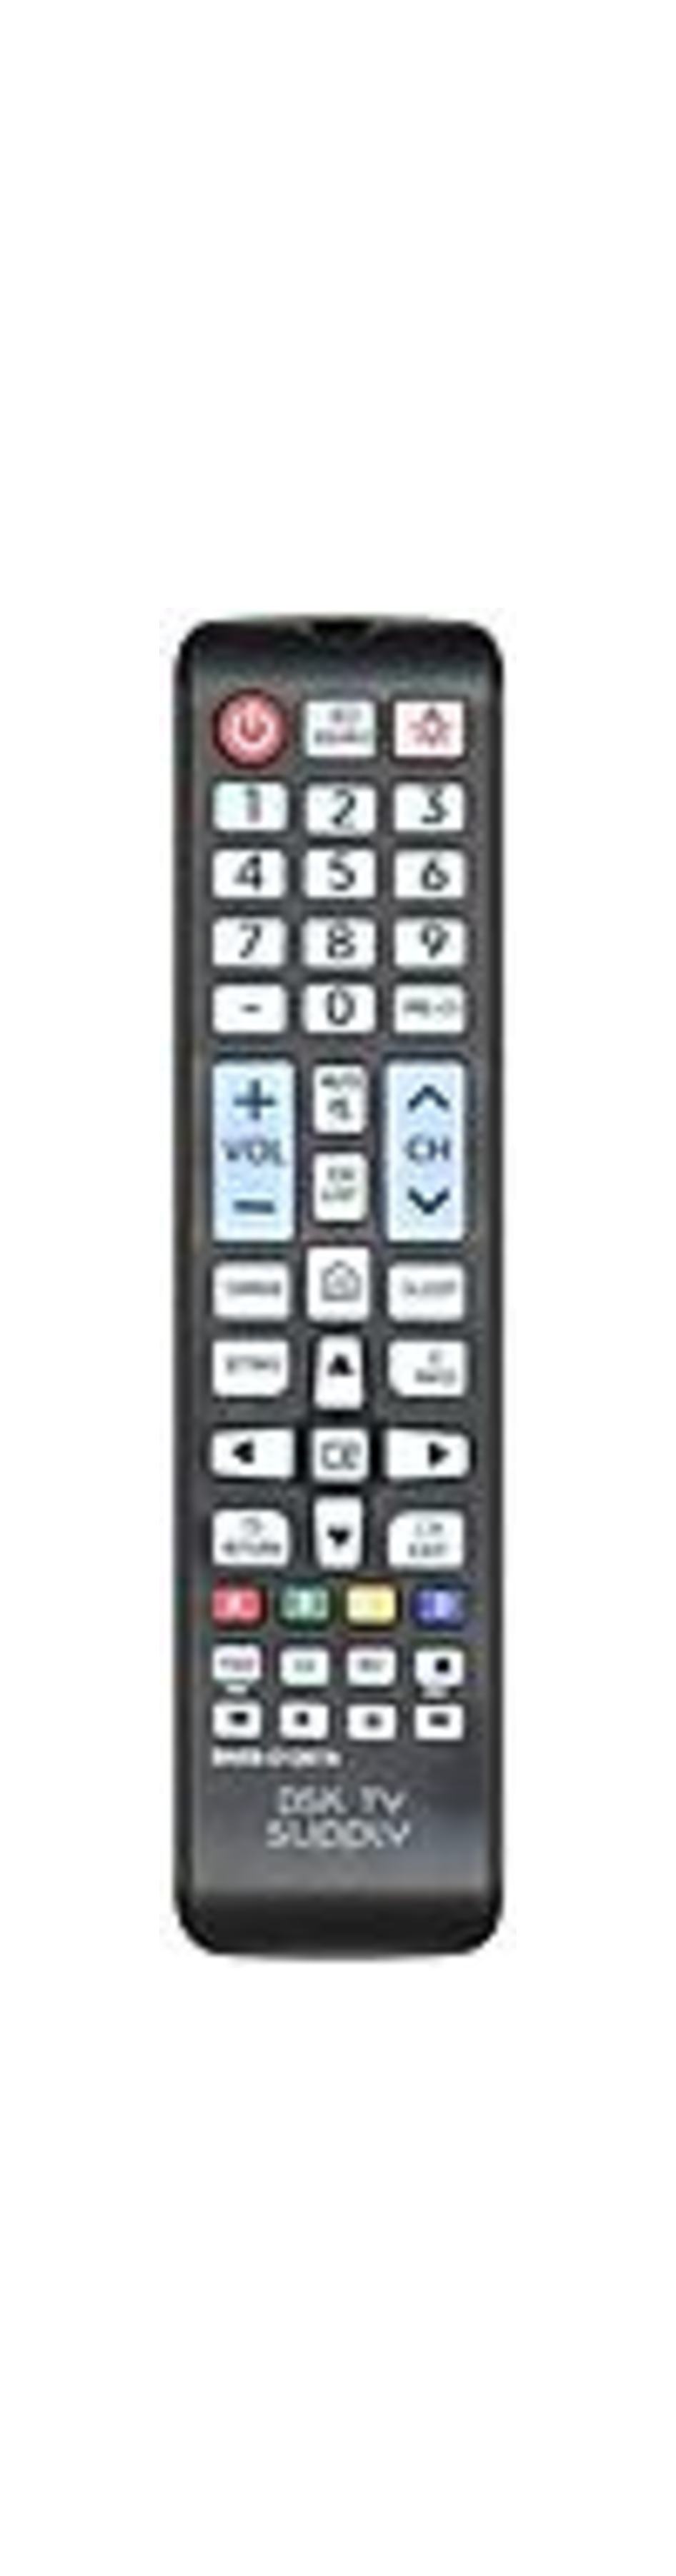 Samsung BN59-01267A Remote Control for M4500 and M5300 Smart HD TV - 2 x AAA Battery Required